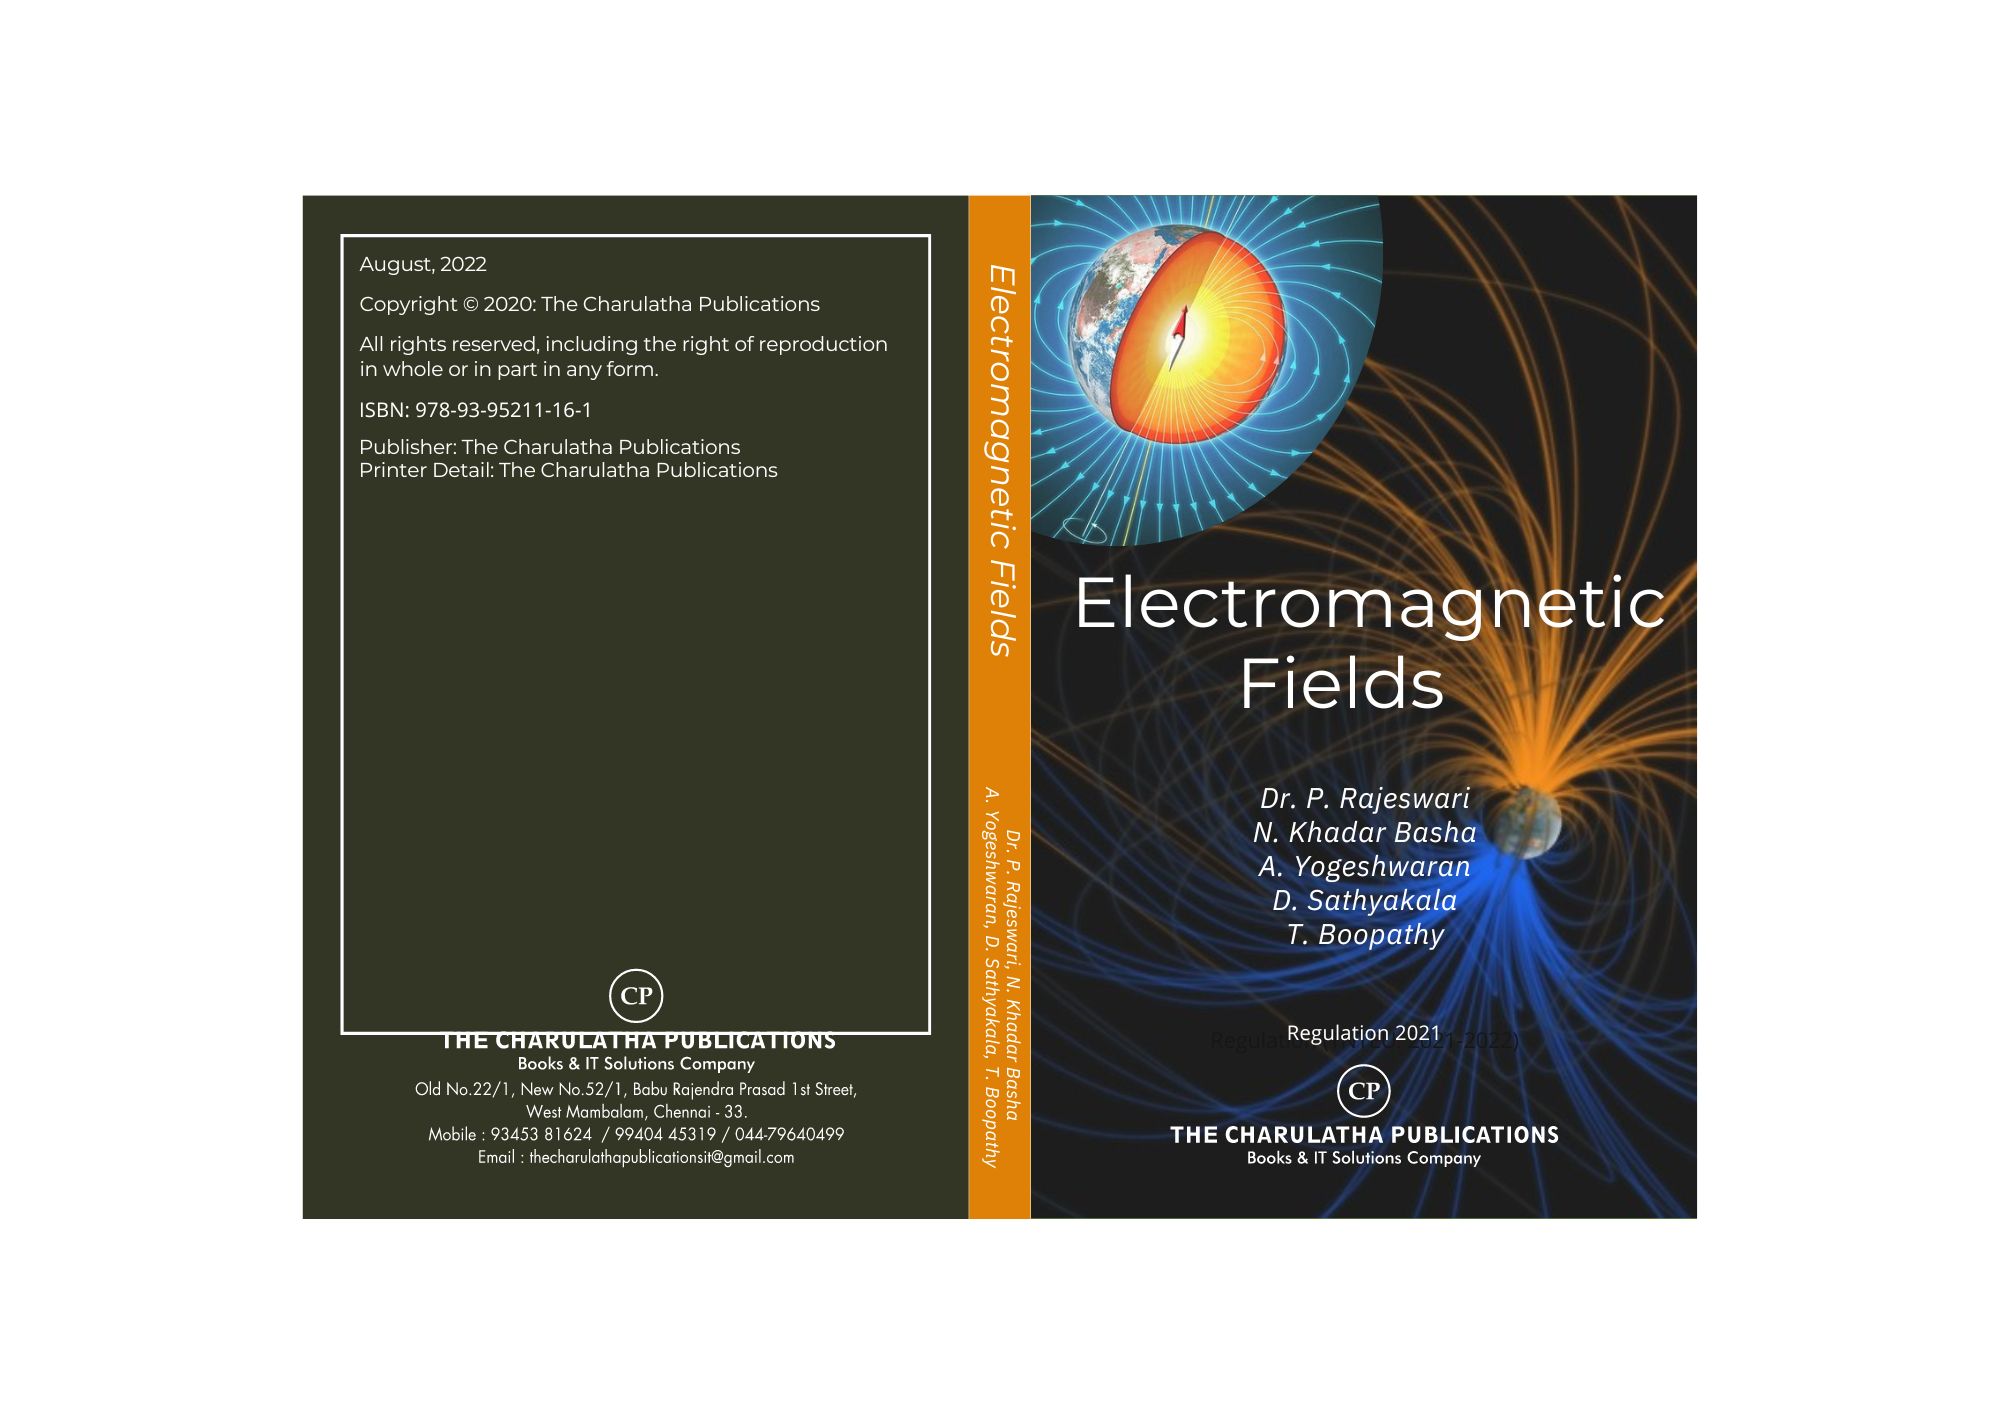 The charulatha publications Electromagnetic fields